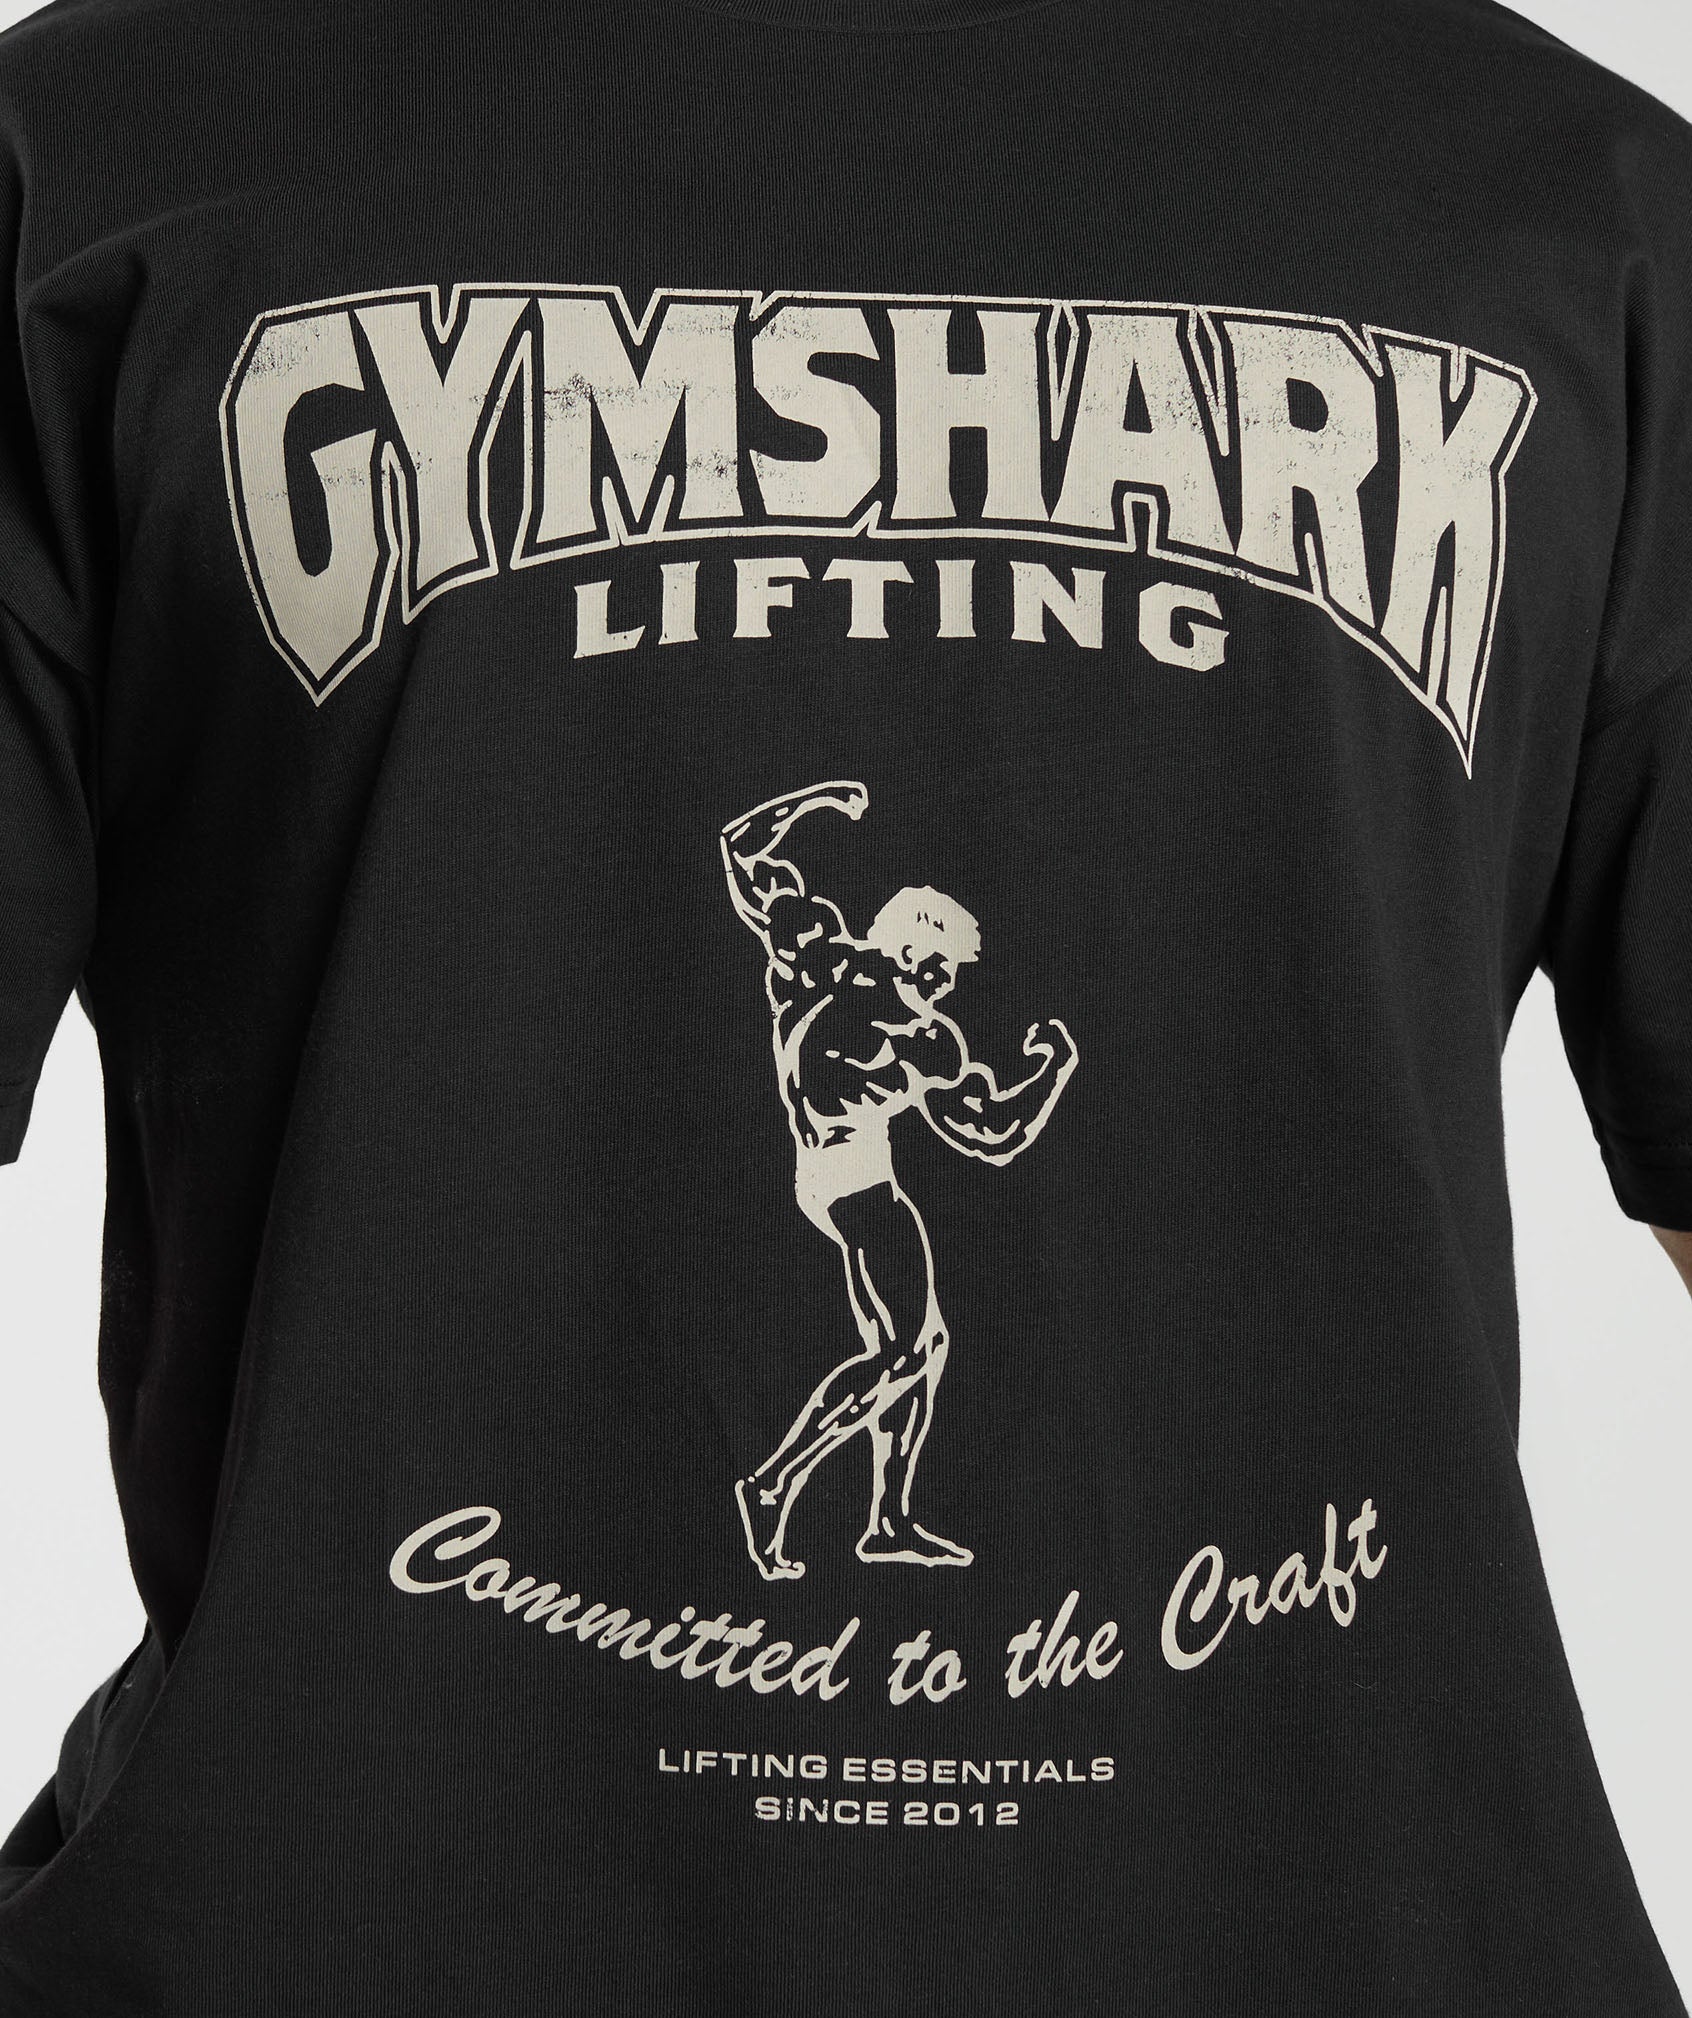 Committed to the Craft T-Shirt in Black - view 5